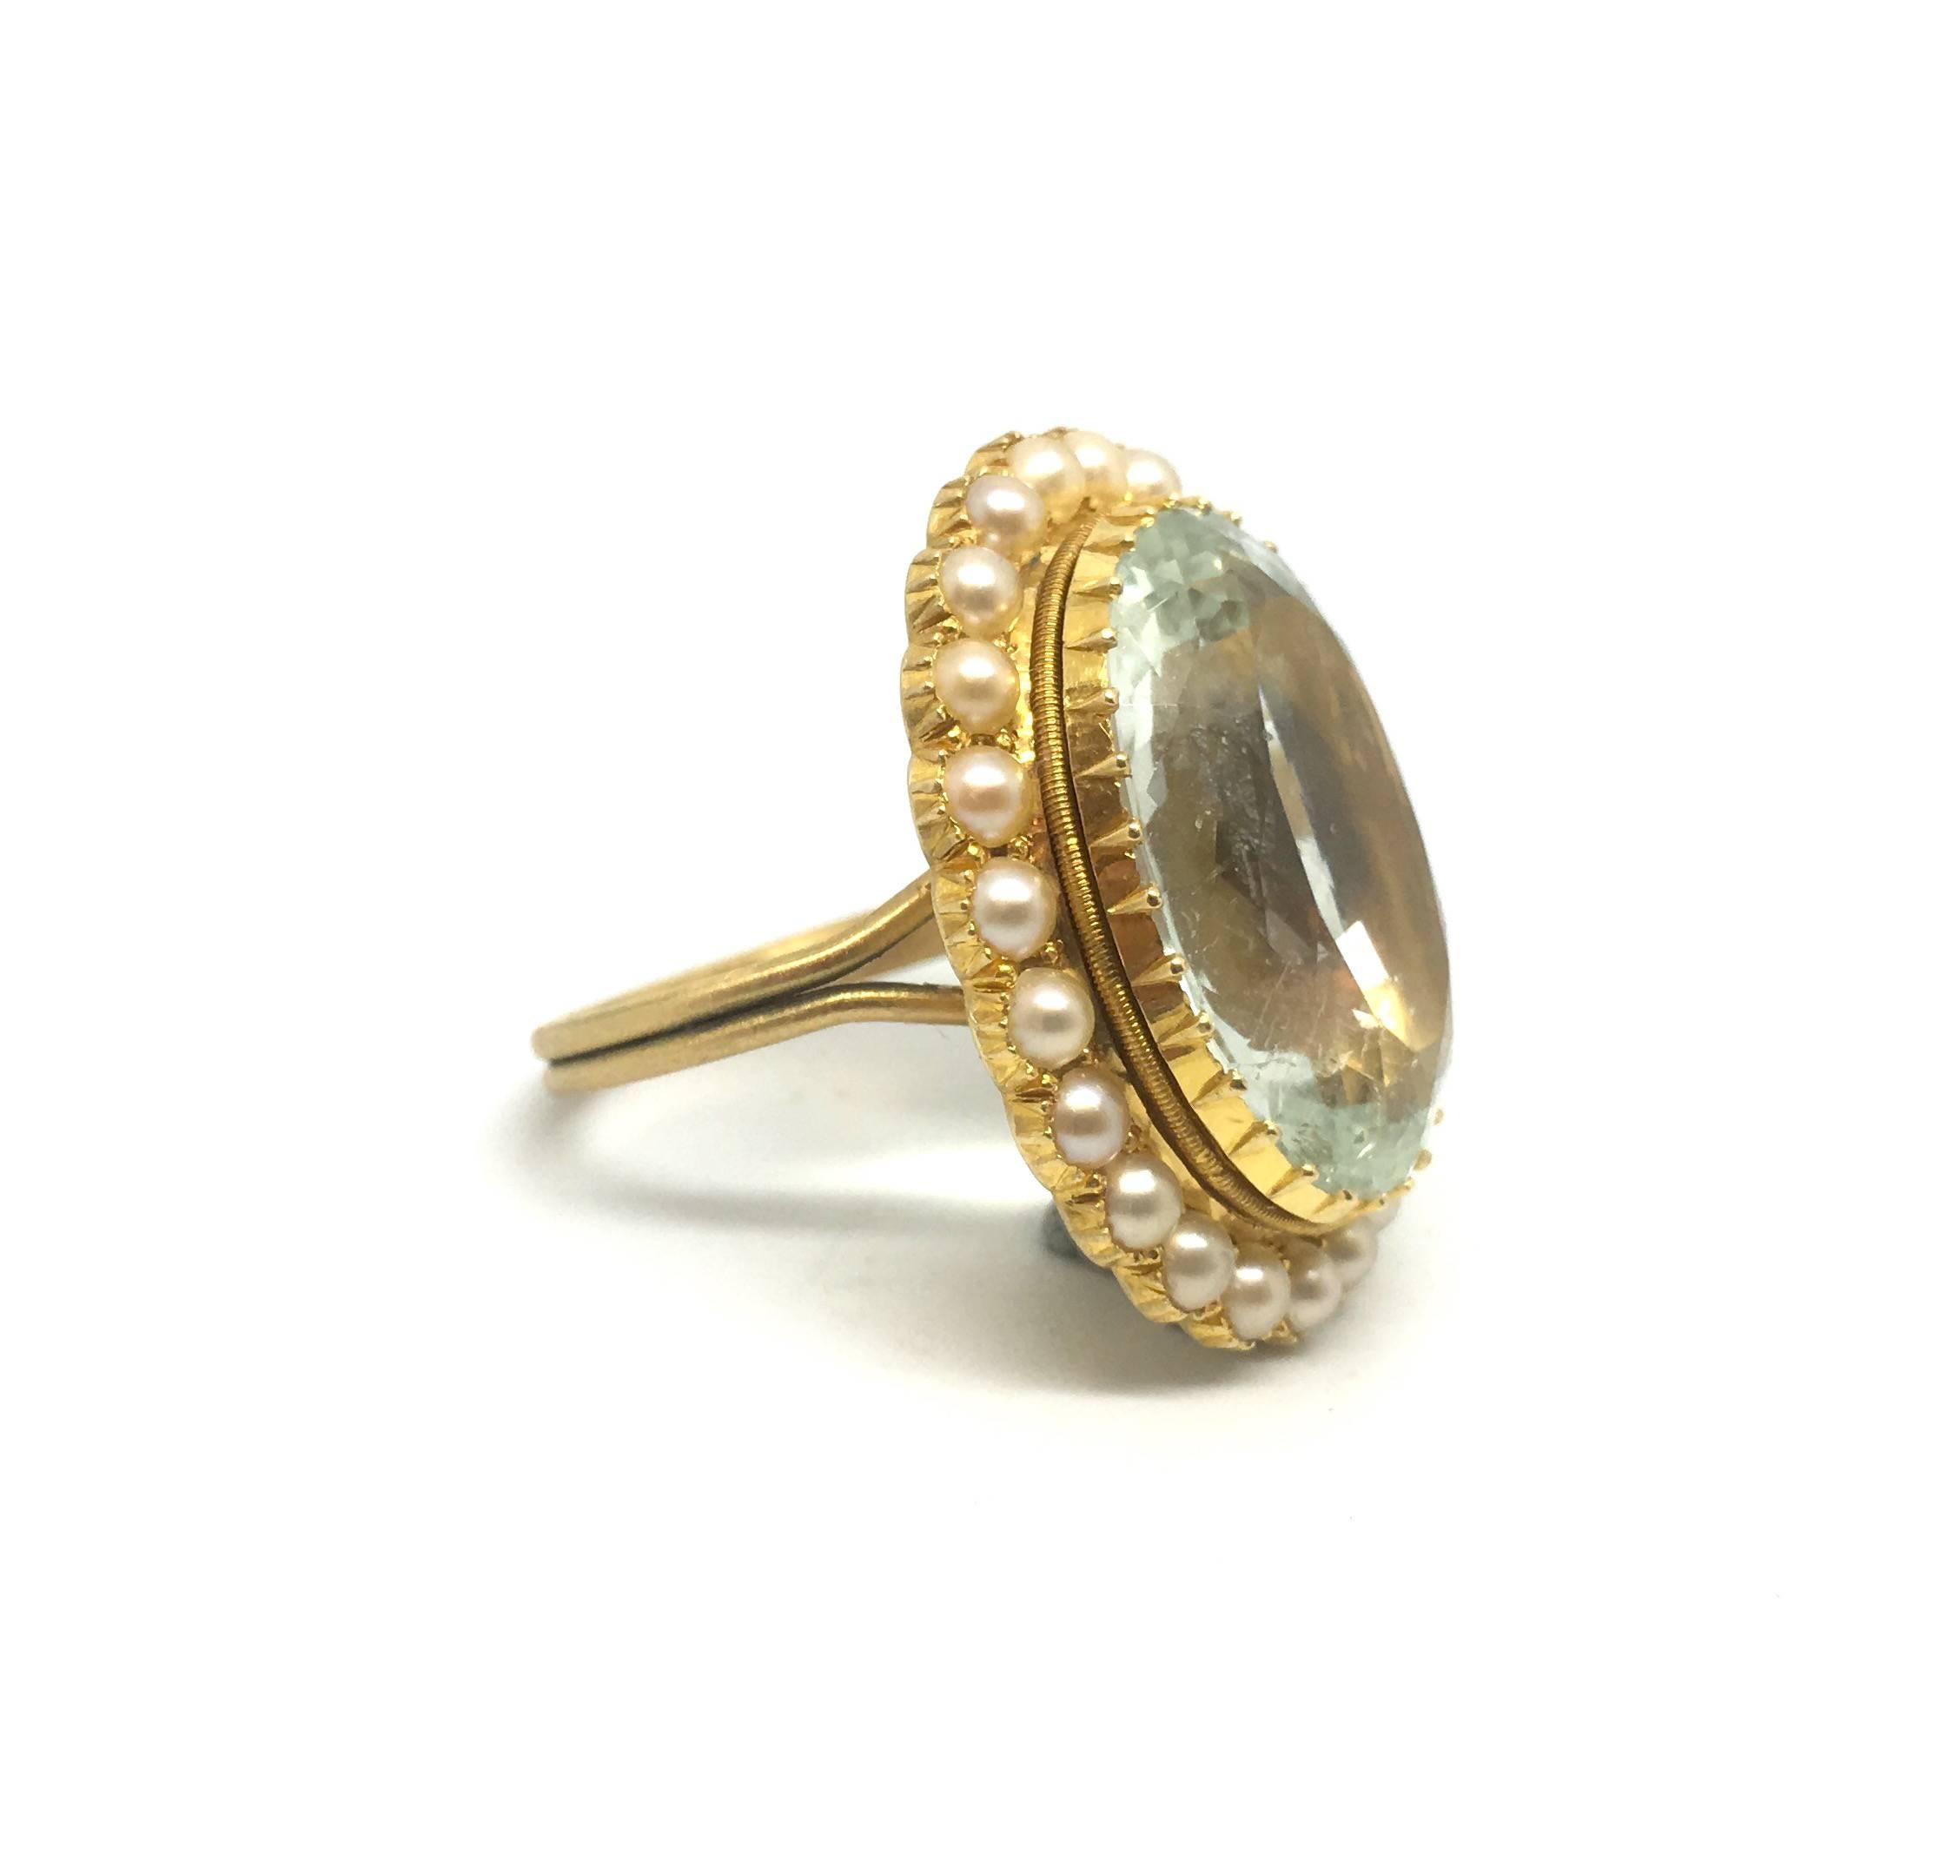 A substantial aquamarine and pearl ring.

Converted from a Victorian brooch with the addition of an 18ct gold under-gallery and band. 

The pale blue aquamarine weighs approximately 18-20cts. 

The face of the ring measures 28 x 23mm approximately.